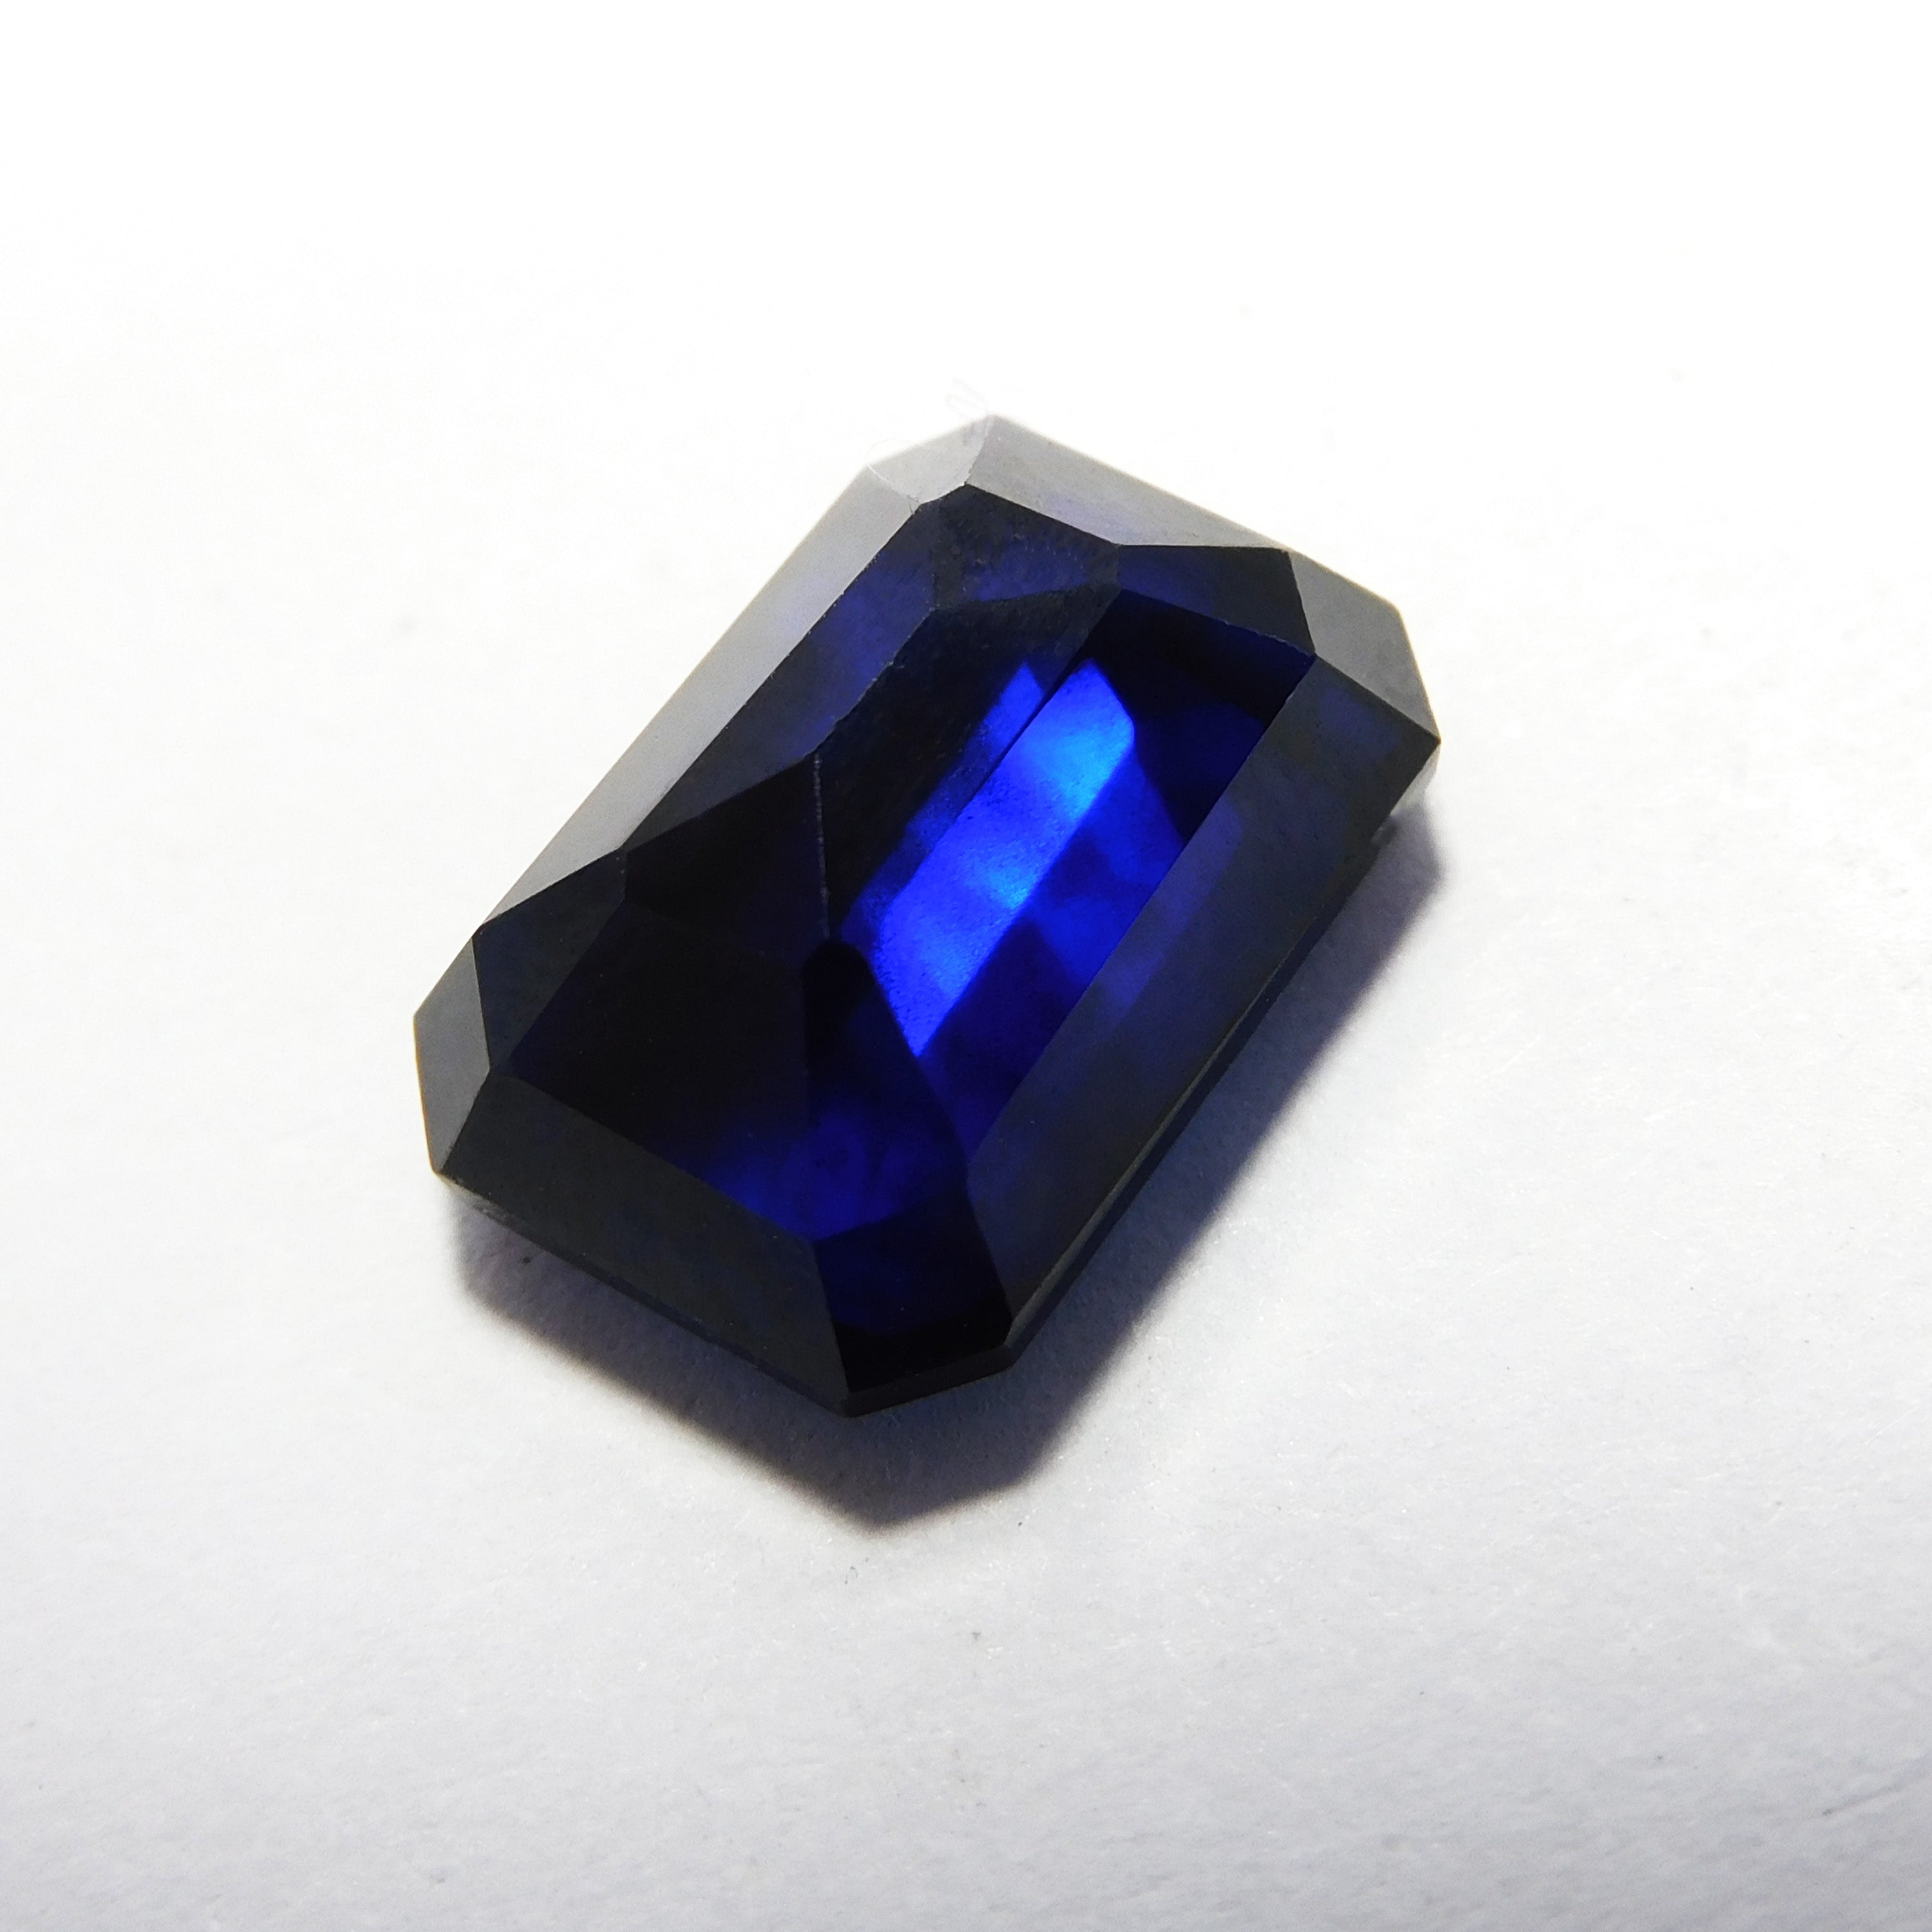 Mini Cut Gemstone For Ring/ Earring ! Tanzanite Necklace ! Emerald Cut 10.12 Carat Blue Tanzanite Natural Blue Color Certified Loose Gemstone Free Delivery - Free Gift